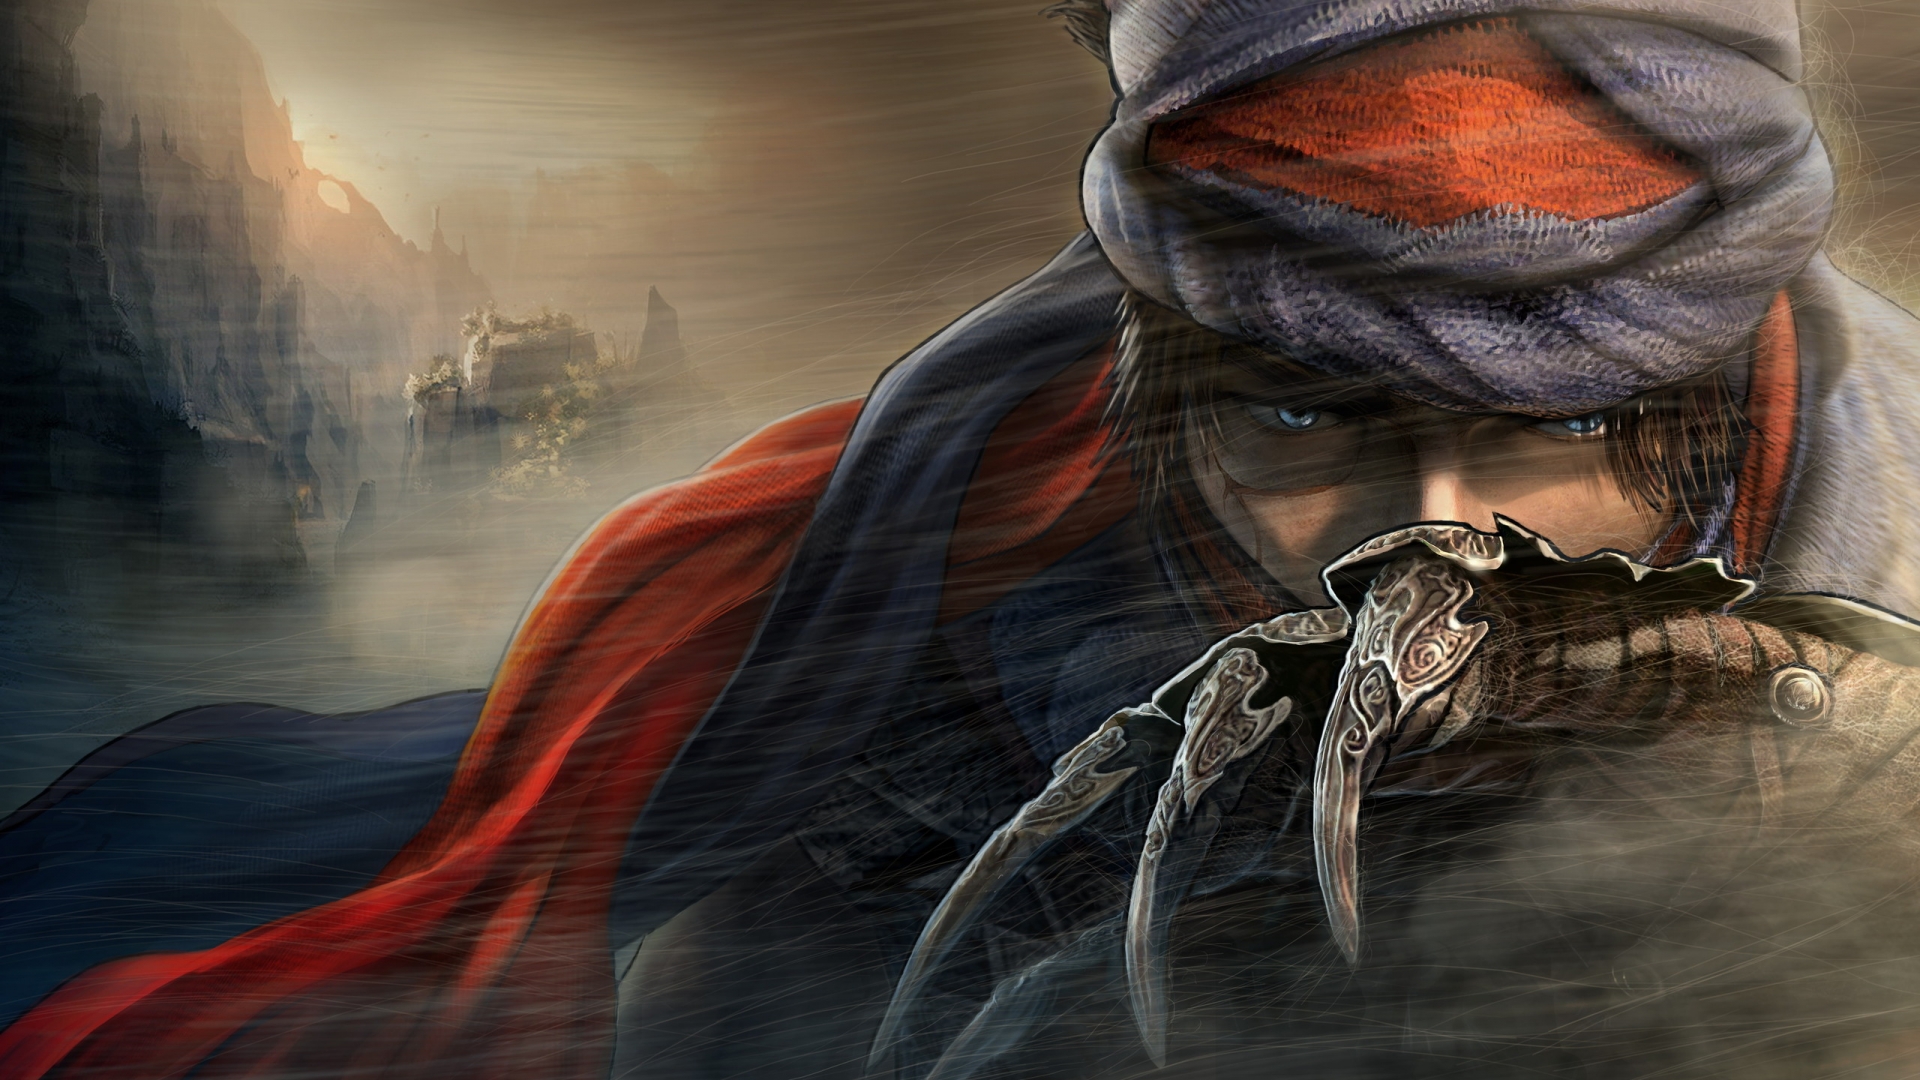 Prince of Persia Face for 1920 x 1080 HDTV 1080p resolution